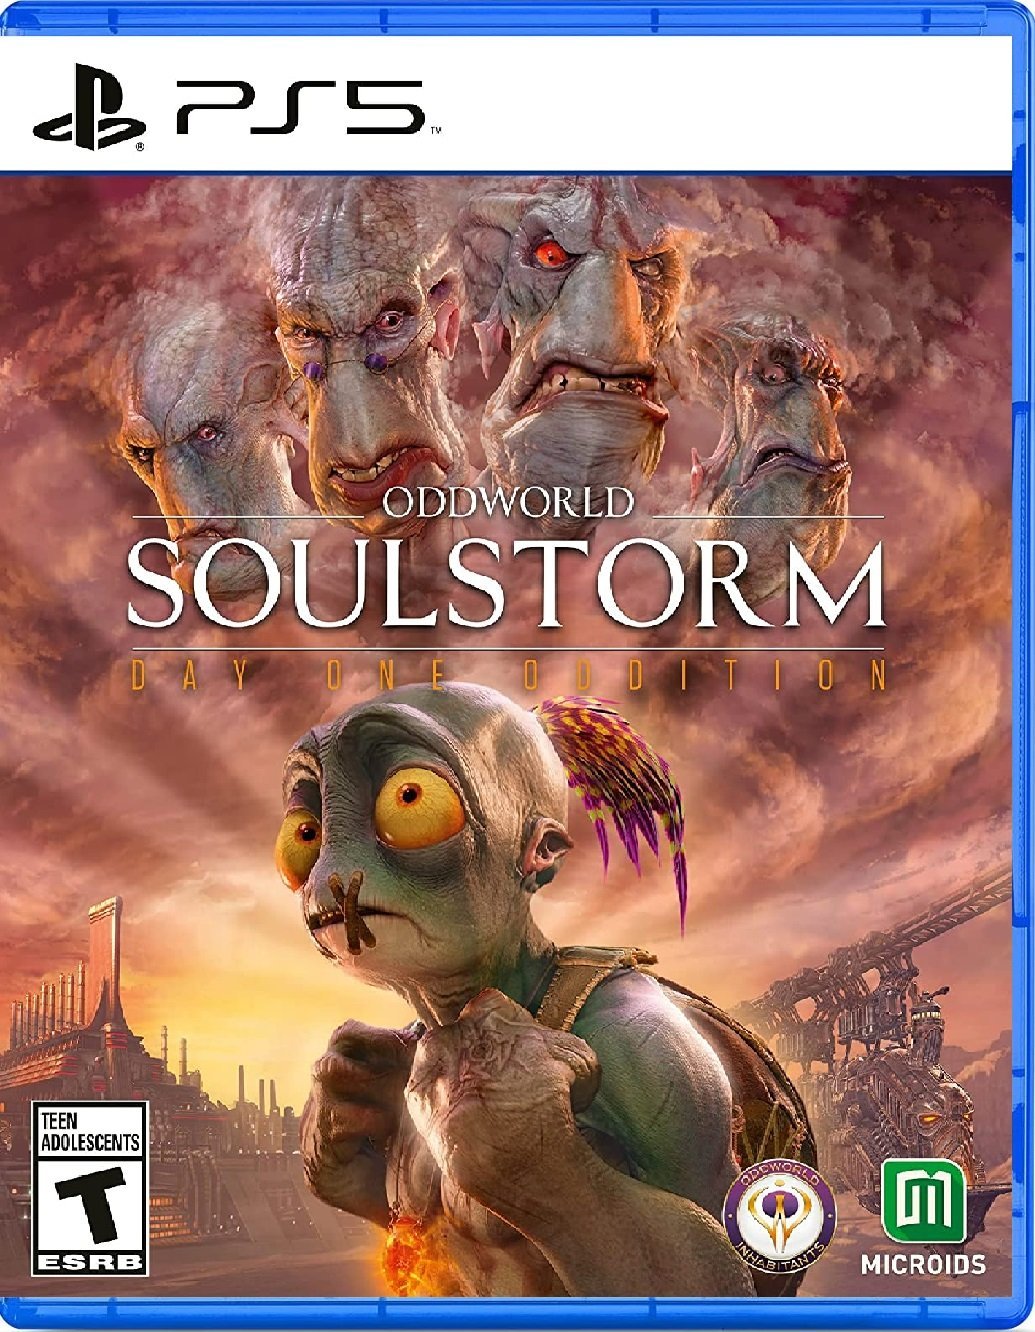 ODDWORLD SOULSTORM DAY ONE PS5 - EasyVideoGame